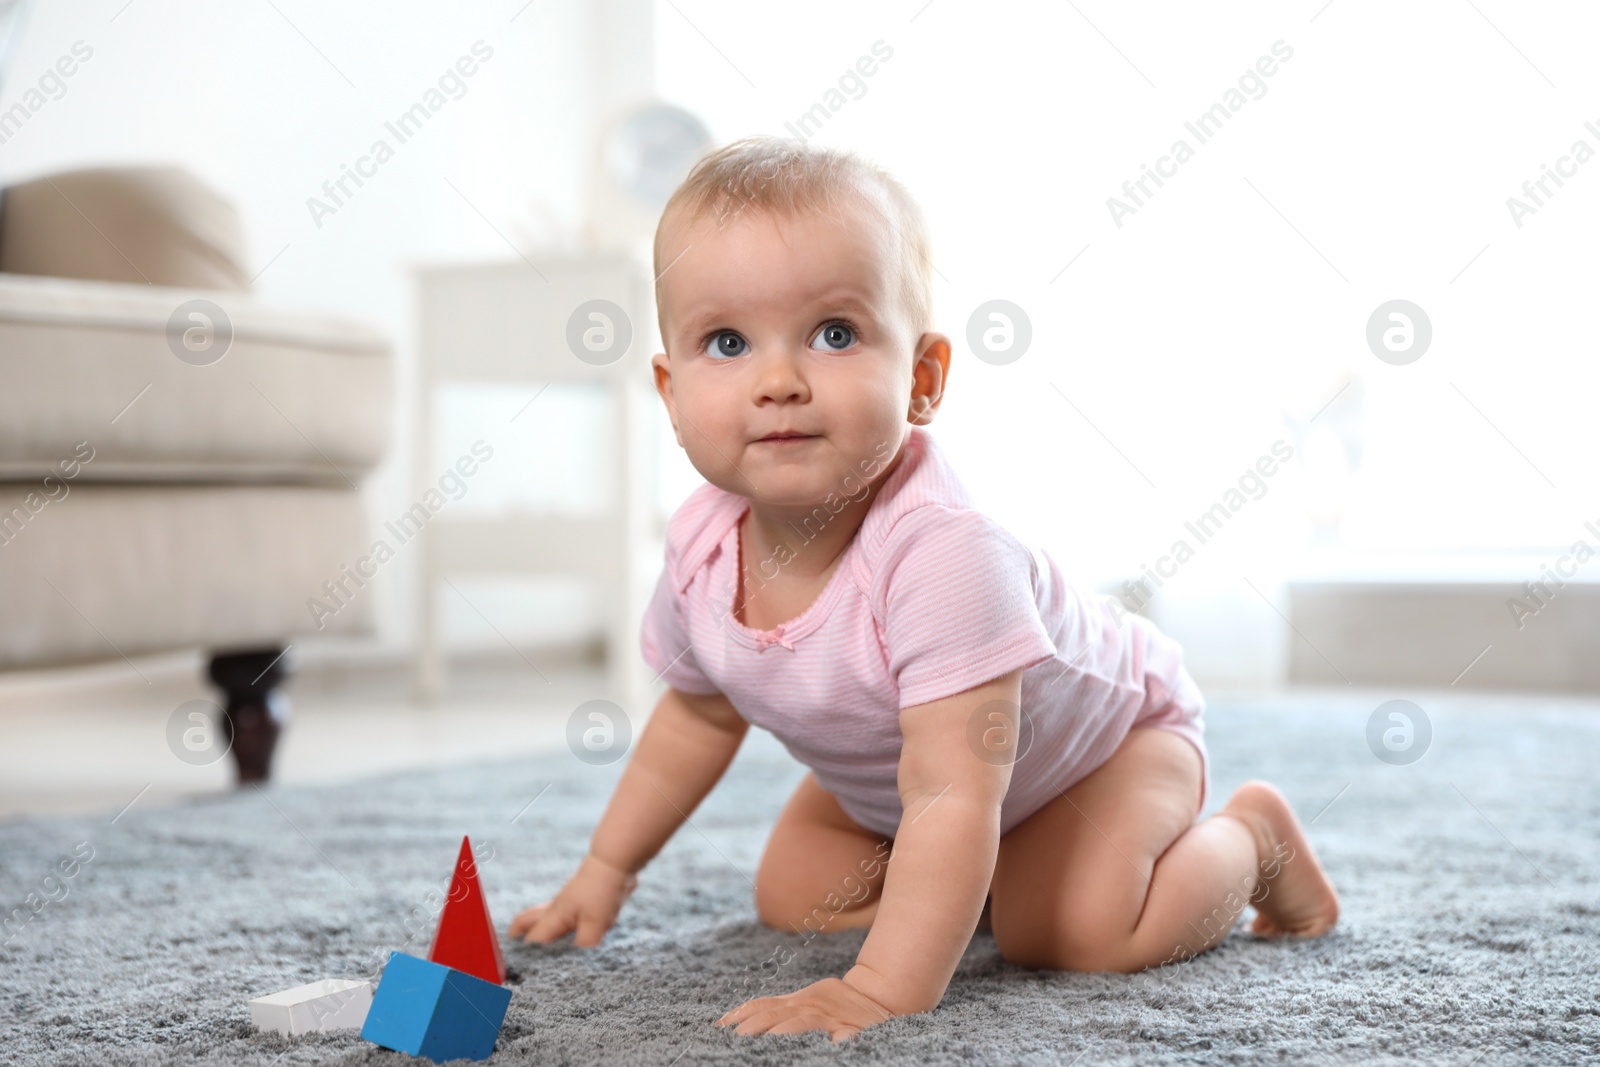 Photo of Cute baby girl playing on floor in room